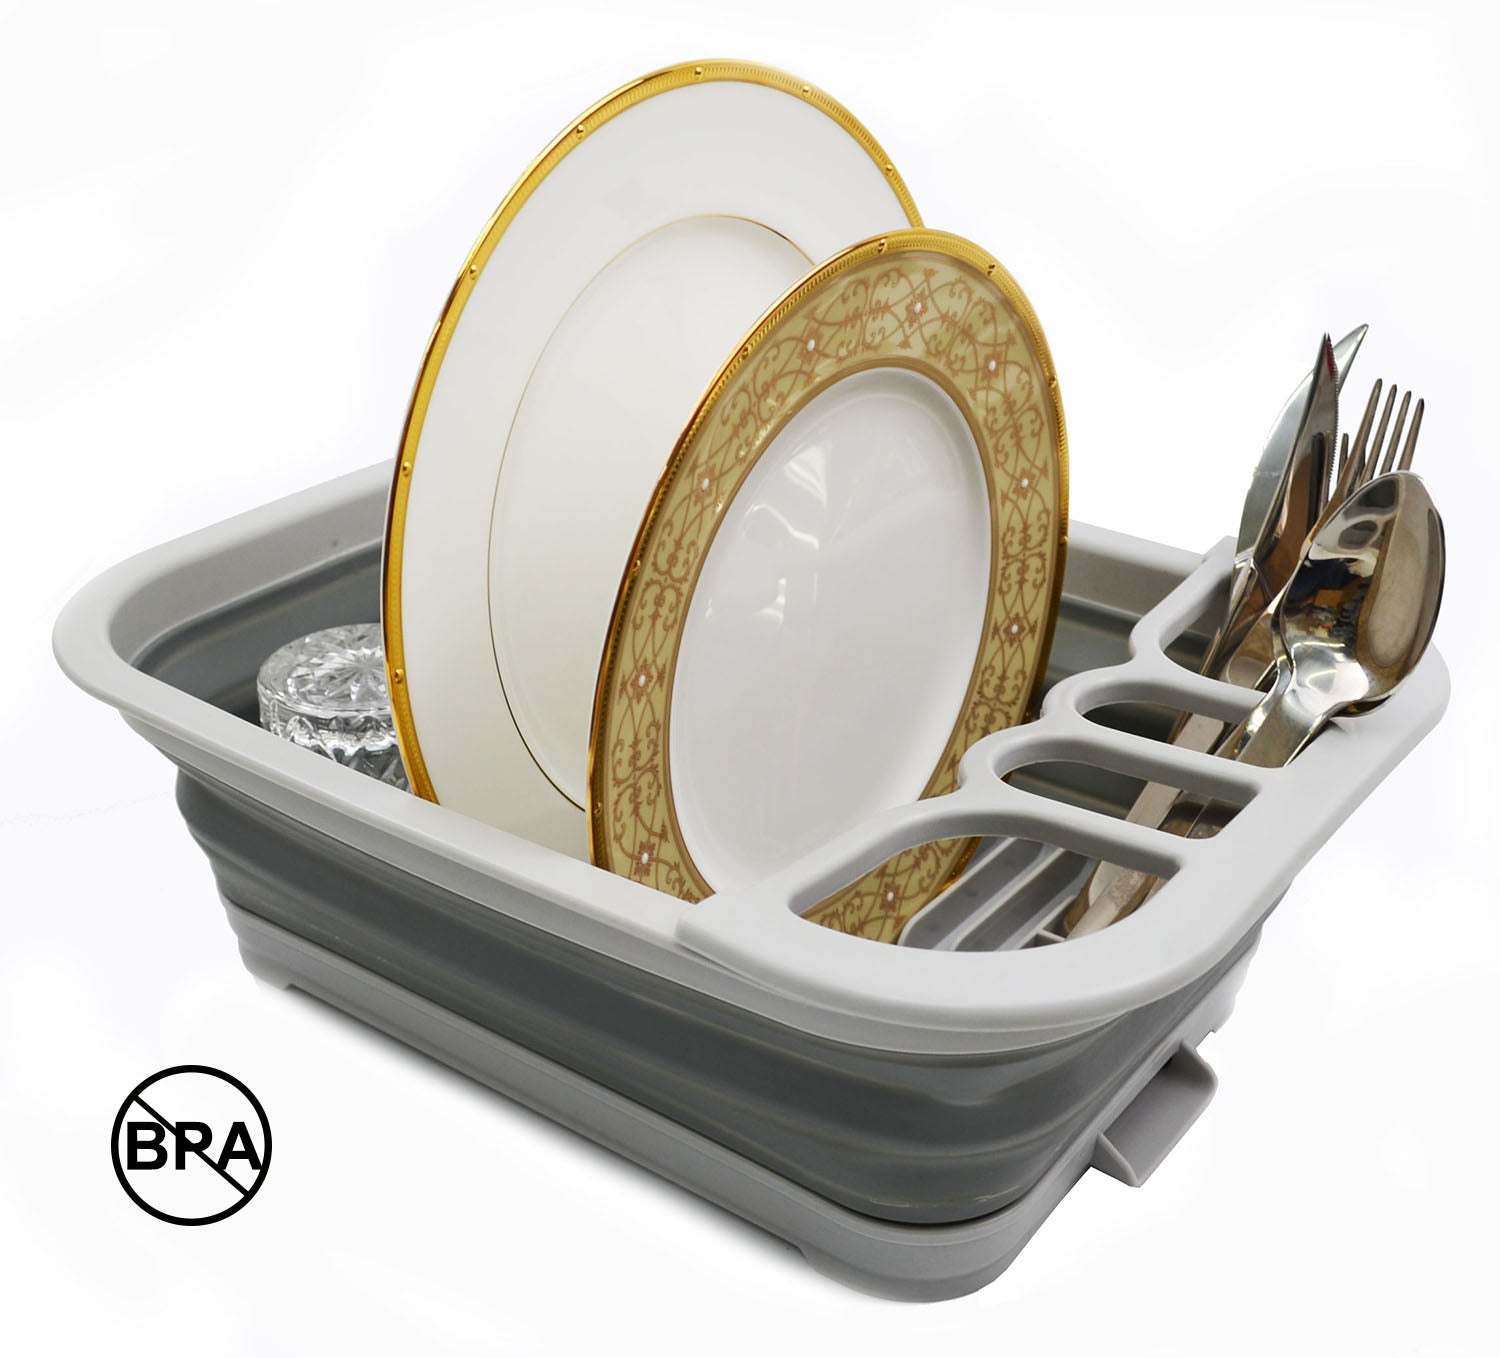 Collapsible dish drainer